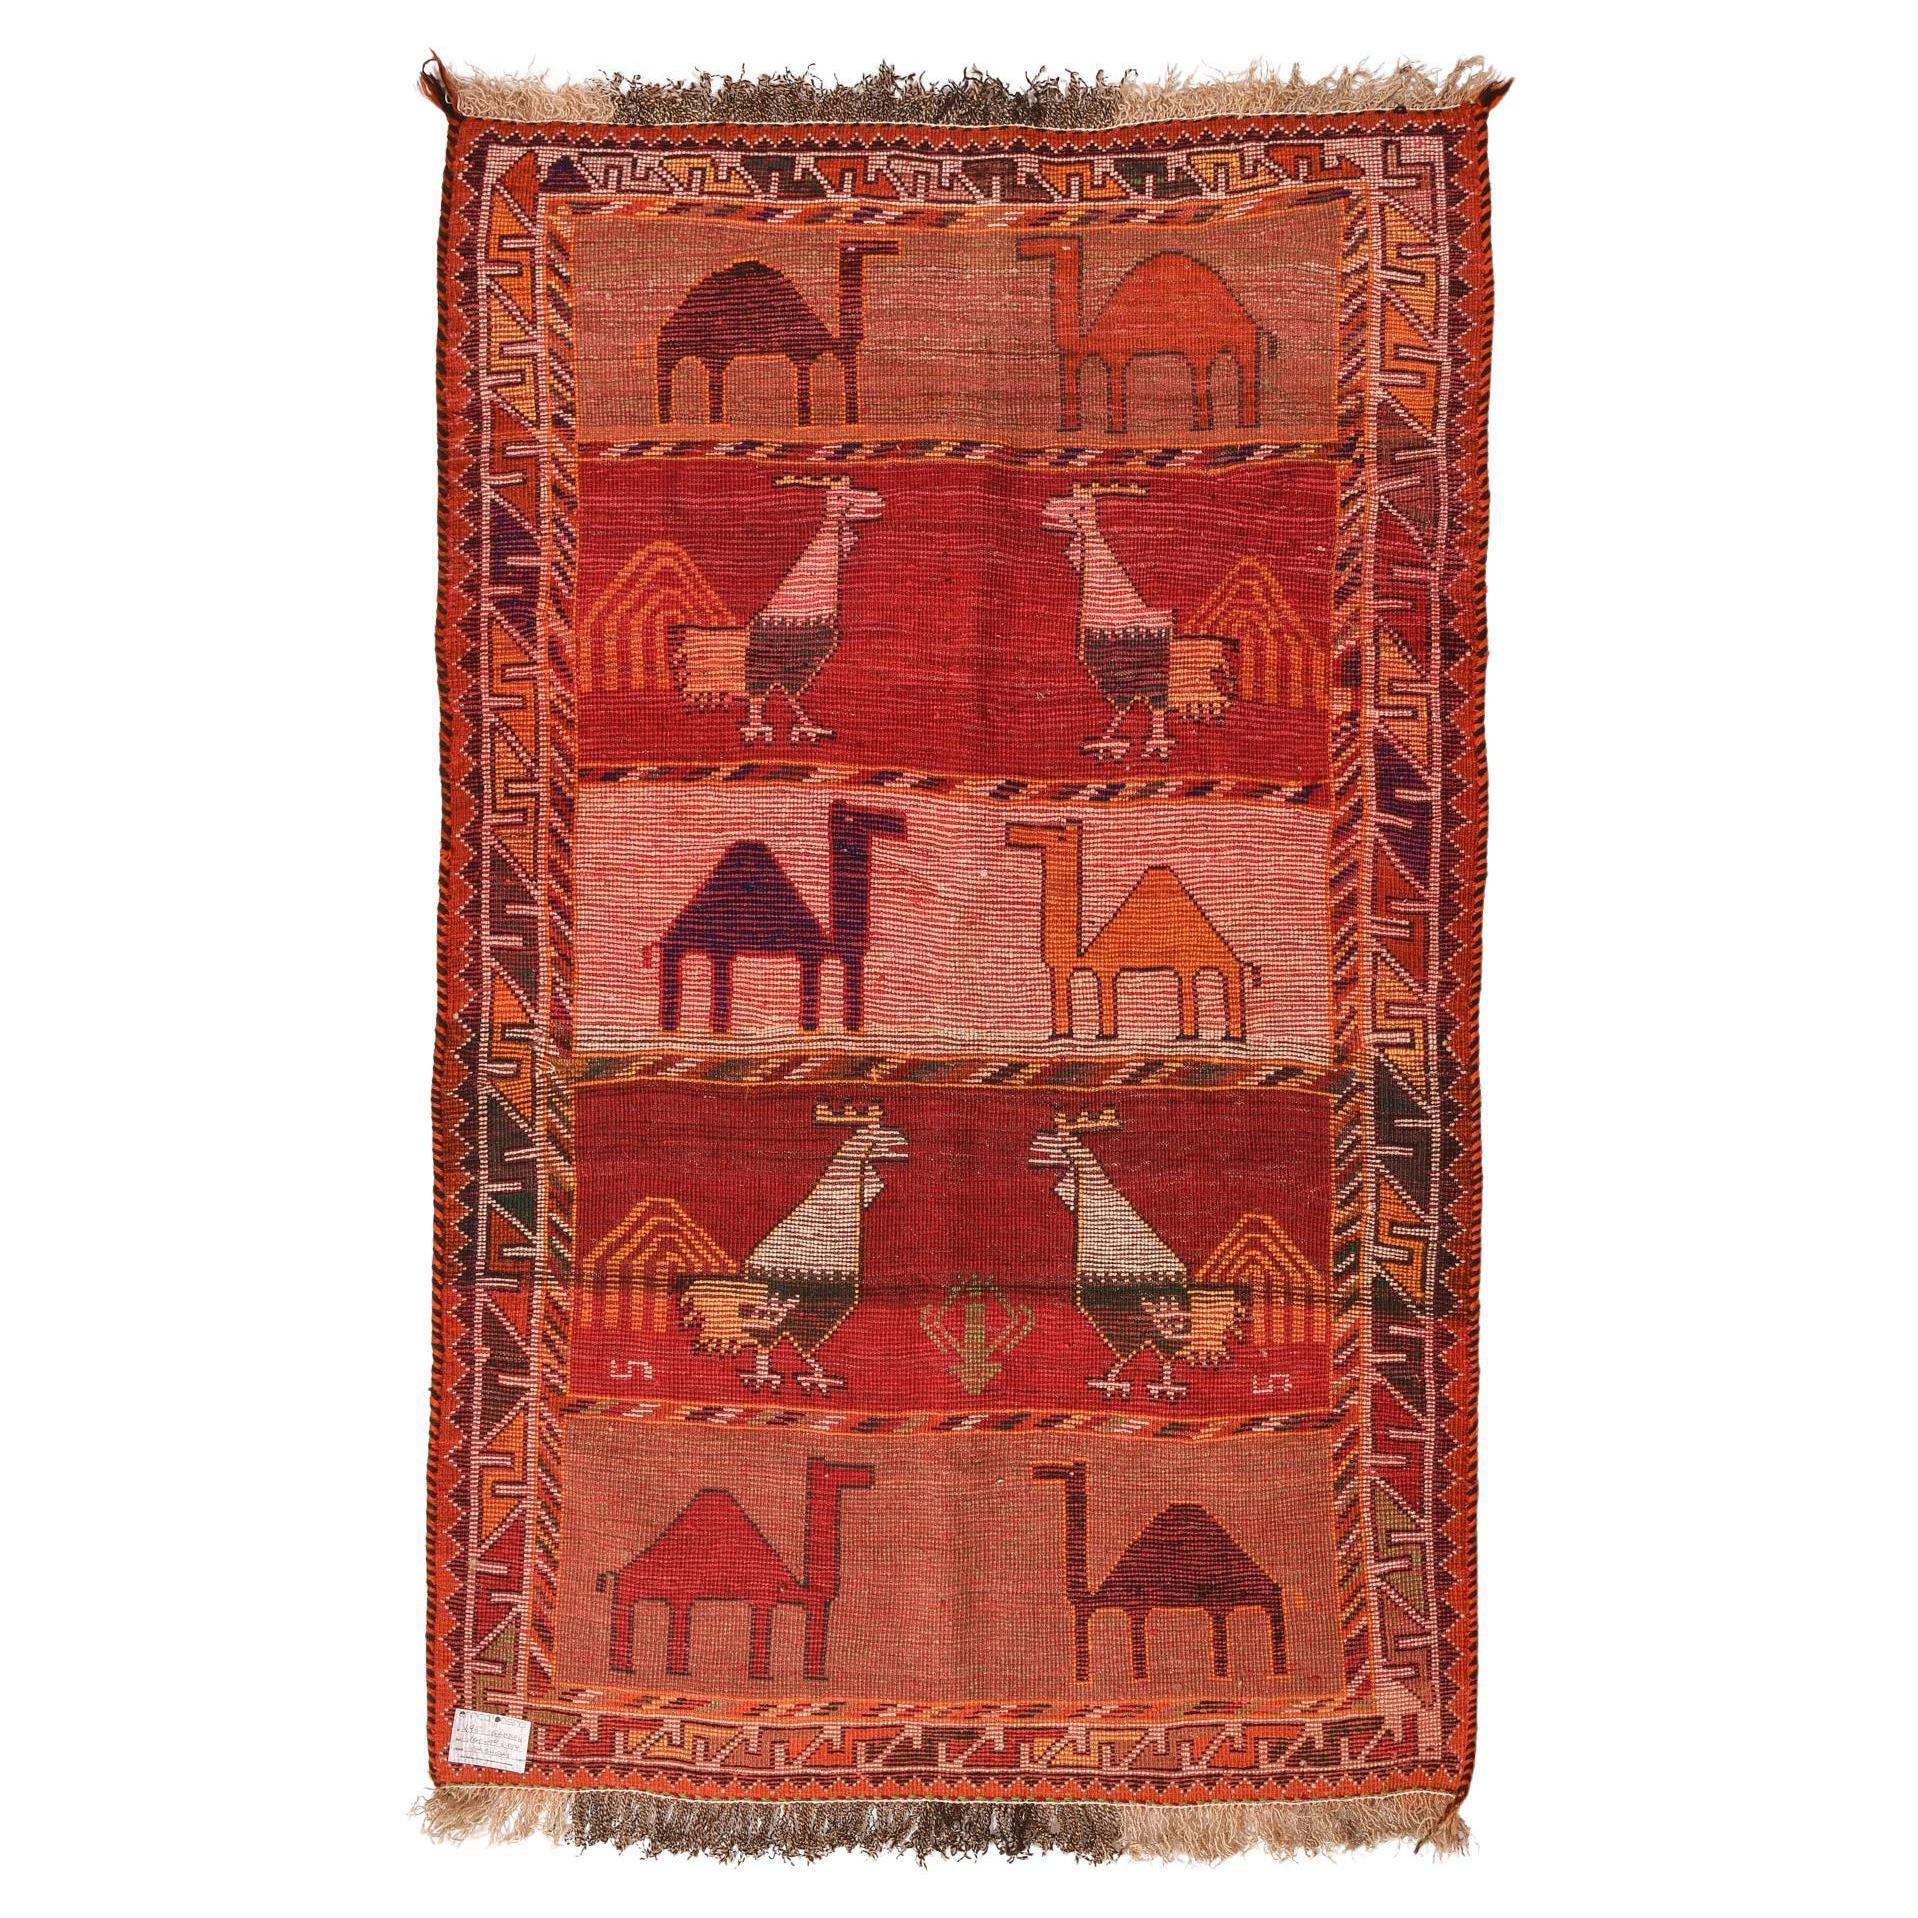 nr. 496 - From my Private Collection ----------------------
Nomadic vintage rug with camels and roosters.  Ideal for a country house, on the floor or hanging, but also in the city, as an unusual provocation: a work of modern art.